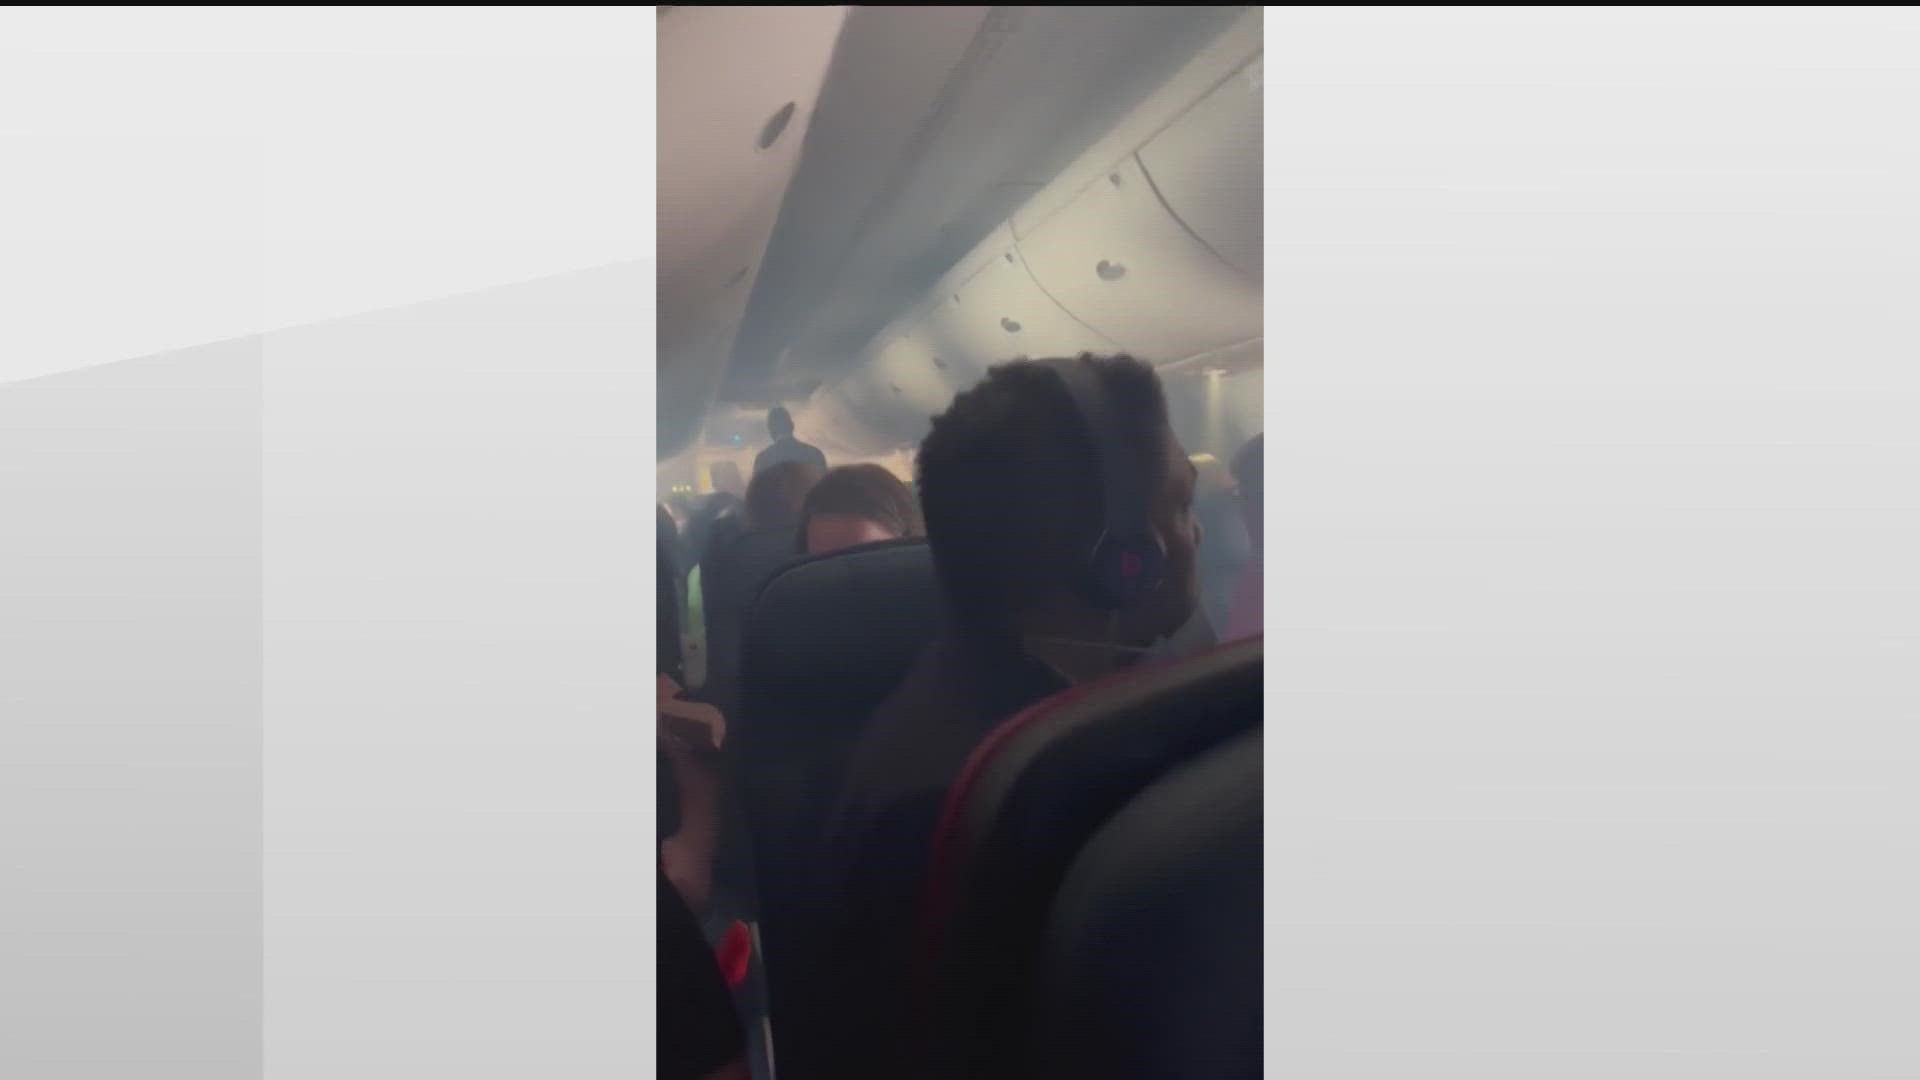 Flight 2846 was diverted to Albuquerque after there was "a smokey odor" in the aircraft, a Delta Air Lines spokesperson said.